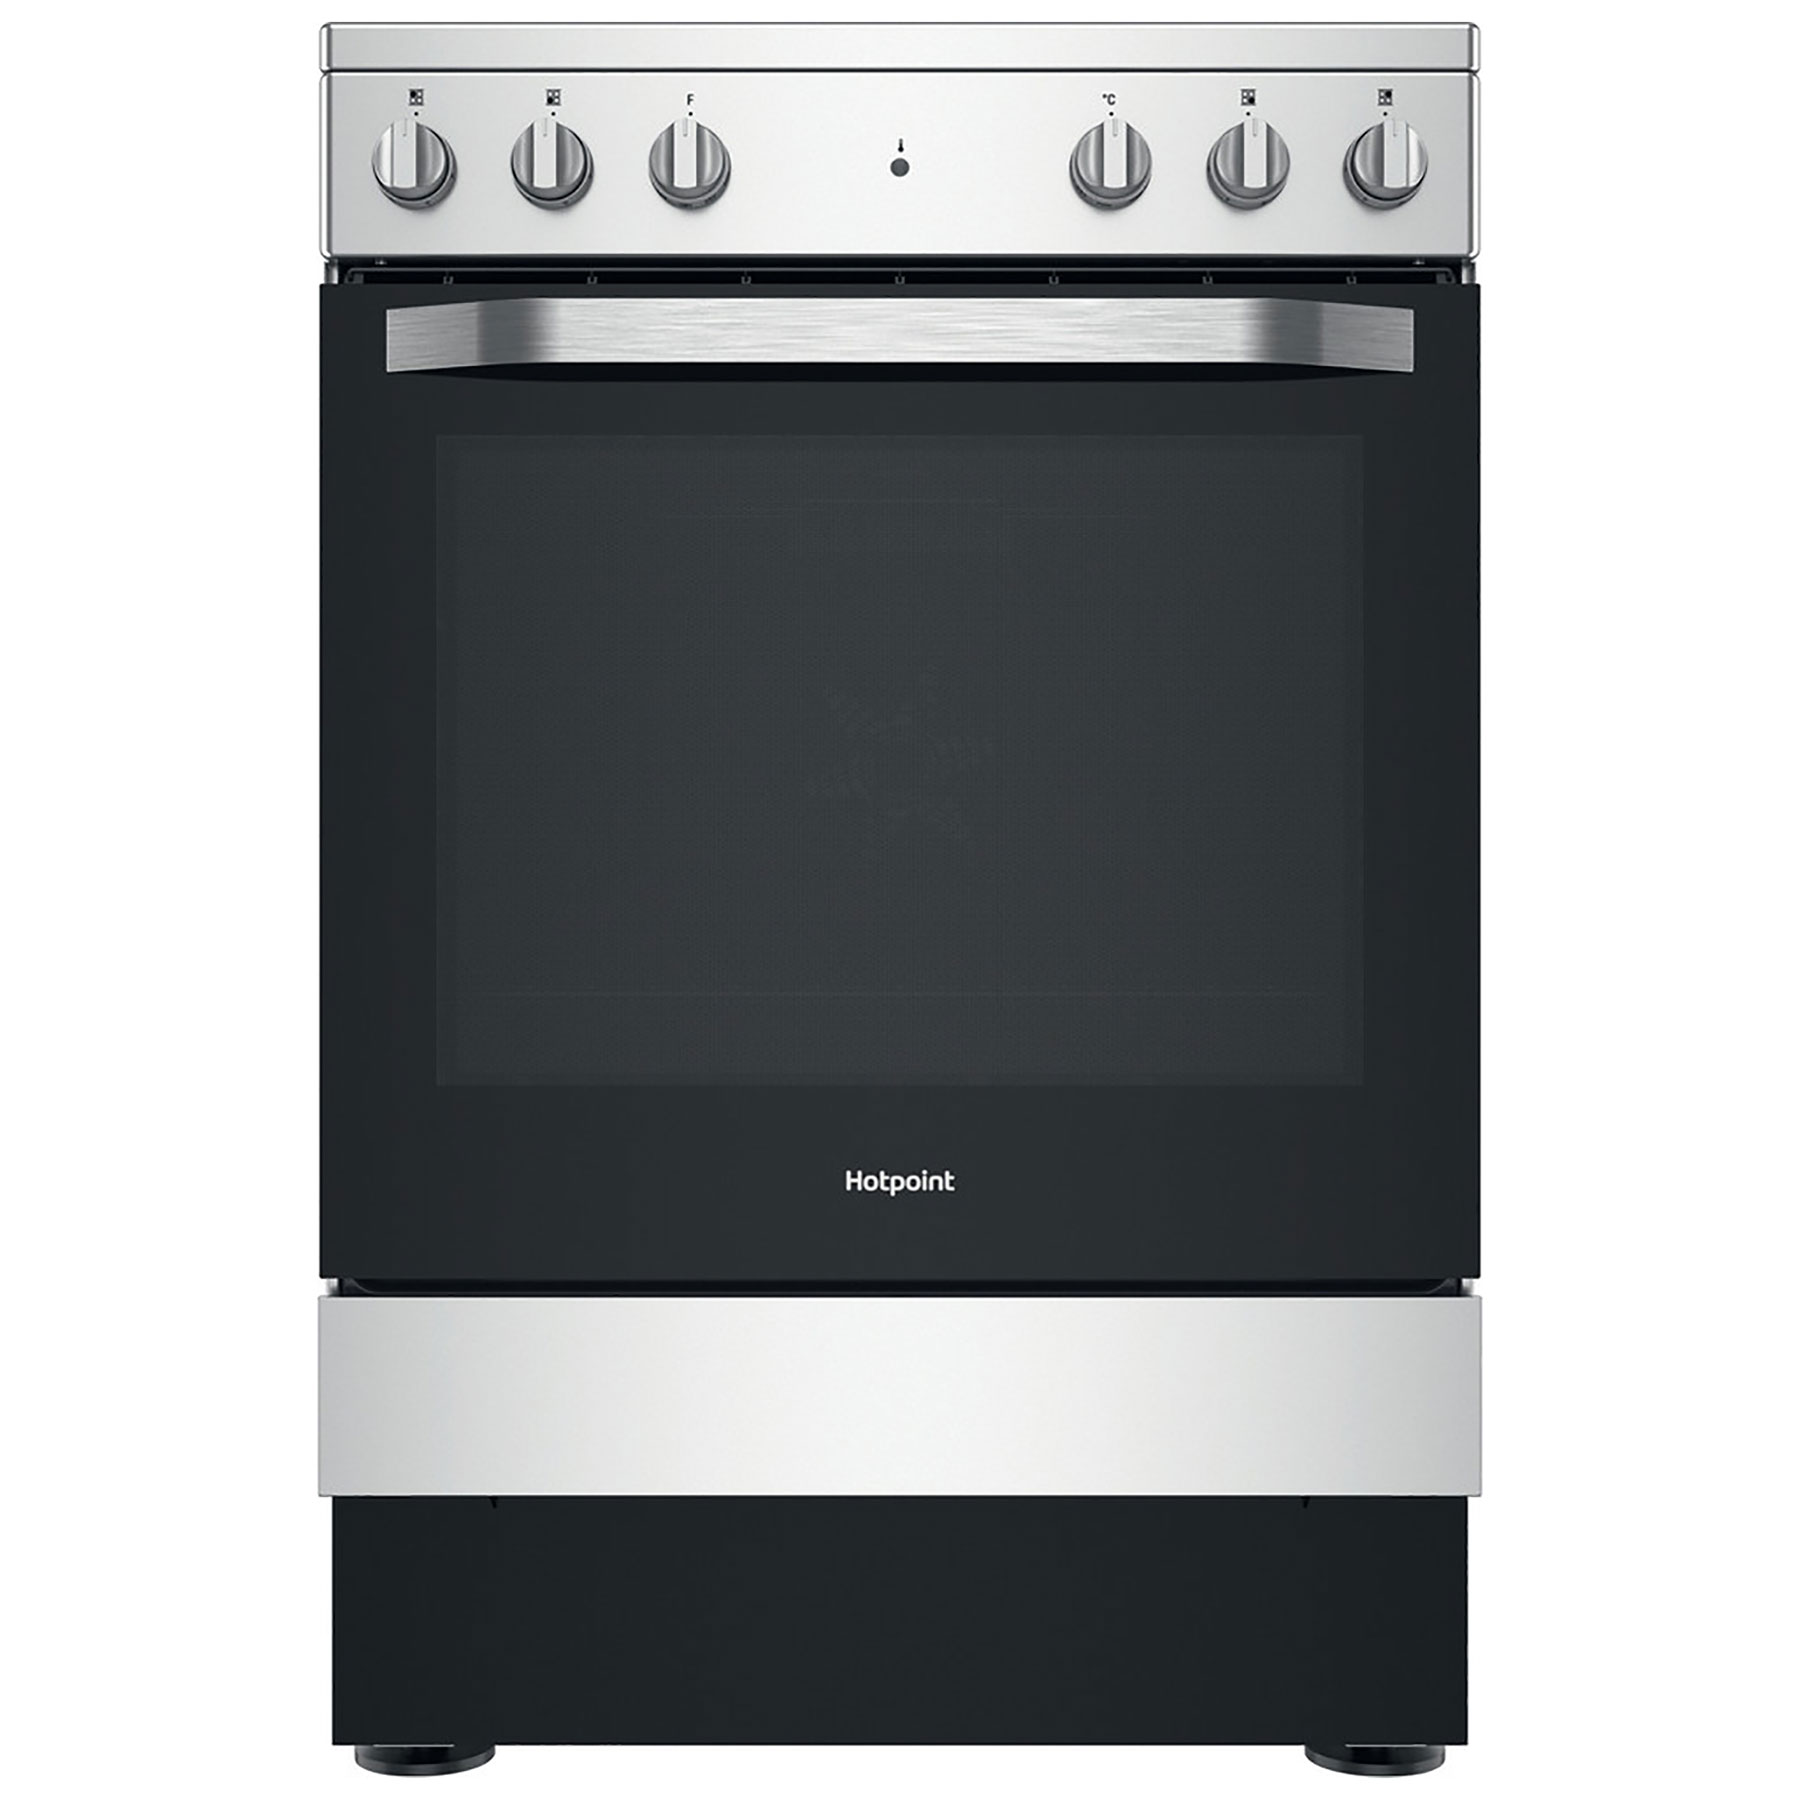 Hotpoint HS67V5KHX 60cm Single Cavity Electric Cooker in St St Ceramic